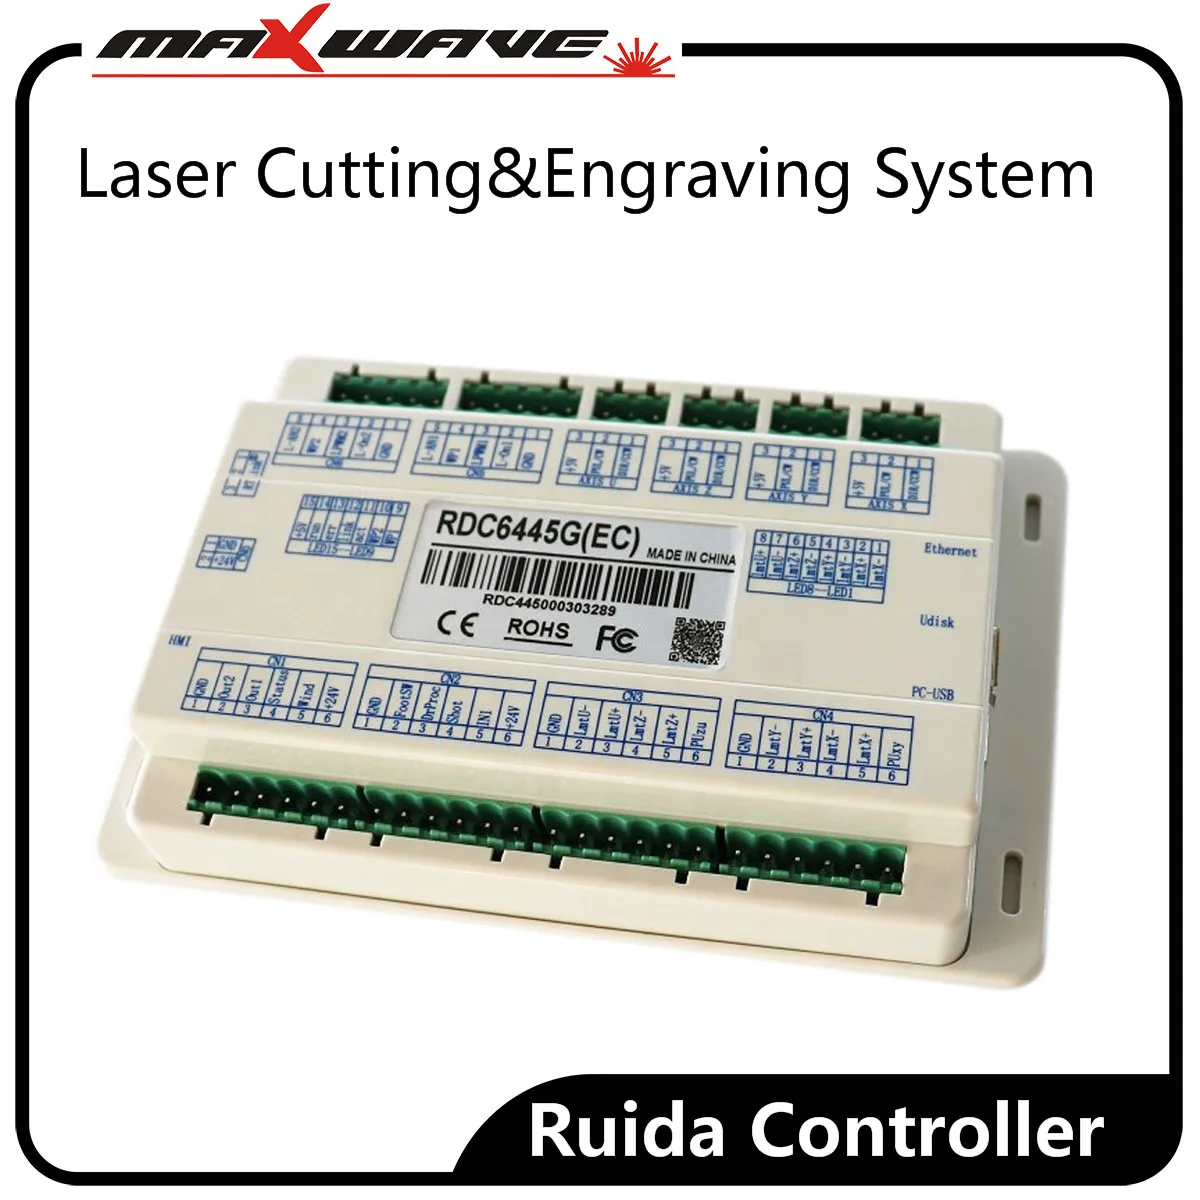 Maxwave Ruida RDV6442G CCD Visual Co2 Laser Controller System for Laser Cutter Engraver Machine images - 6